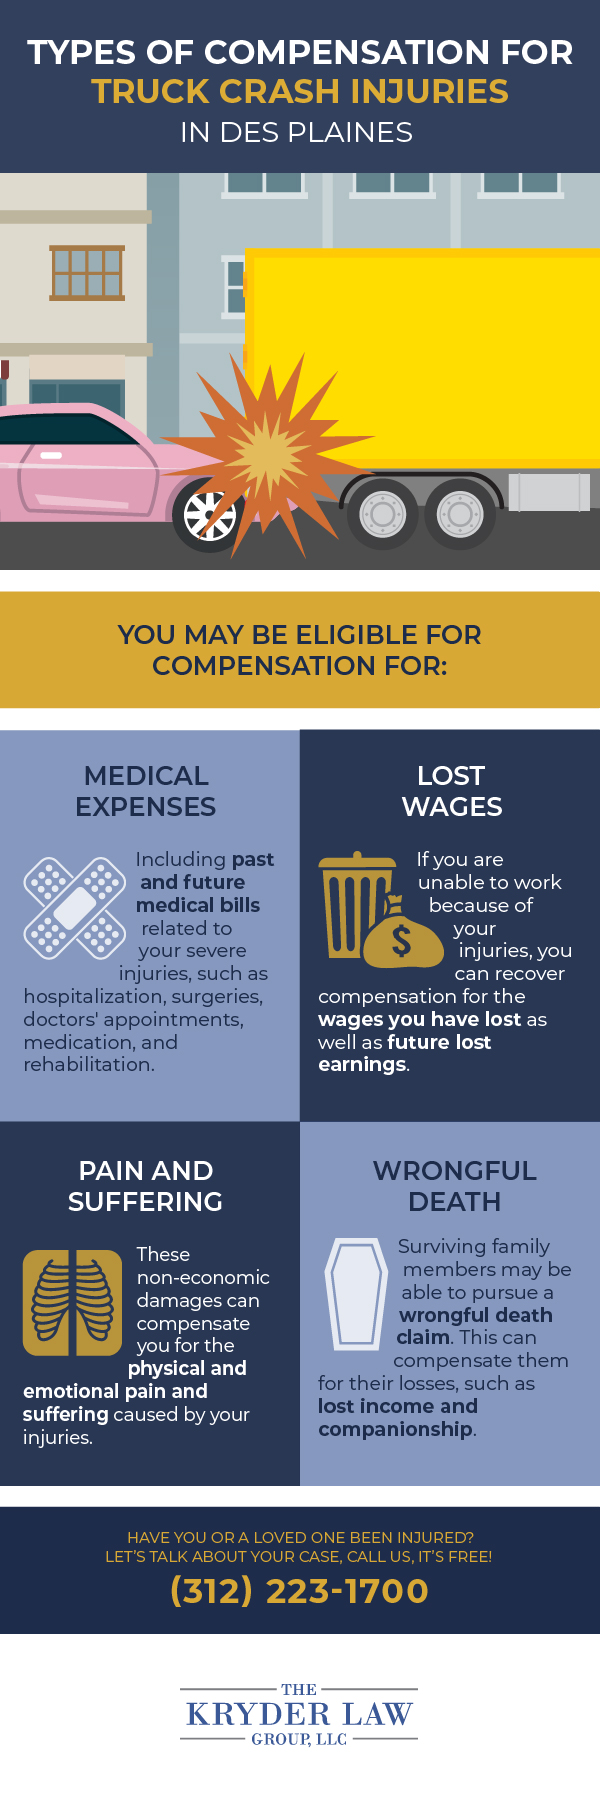 Types of Compensation for Truck Crash Injuries in Des Plaines Infographic